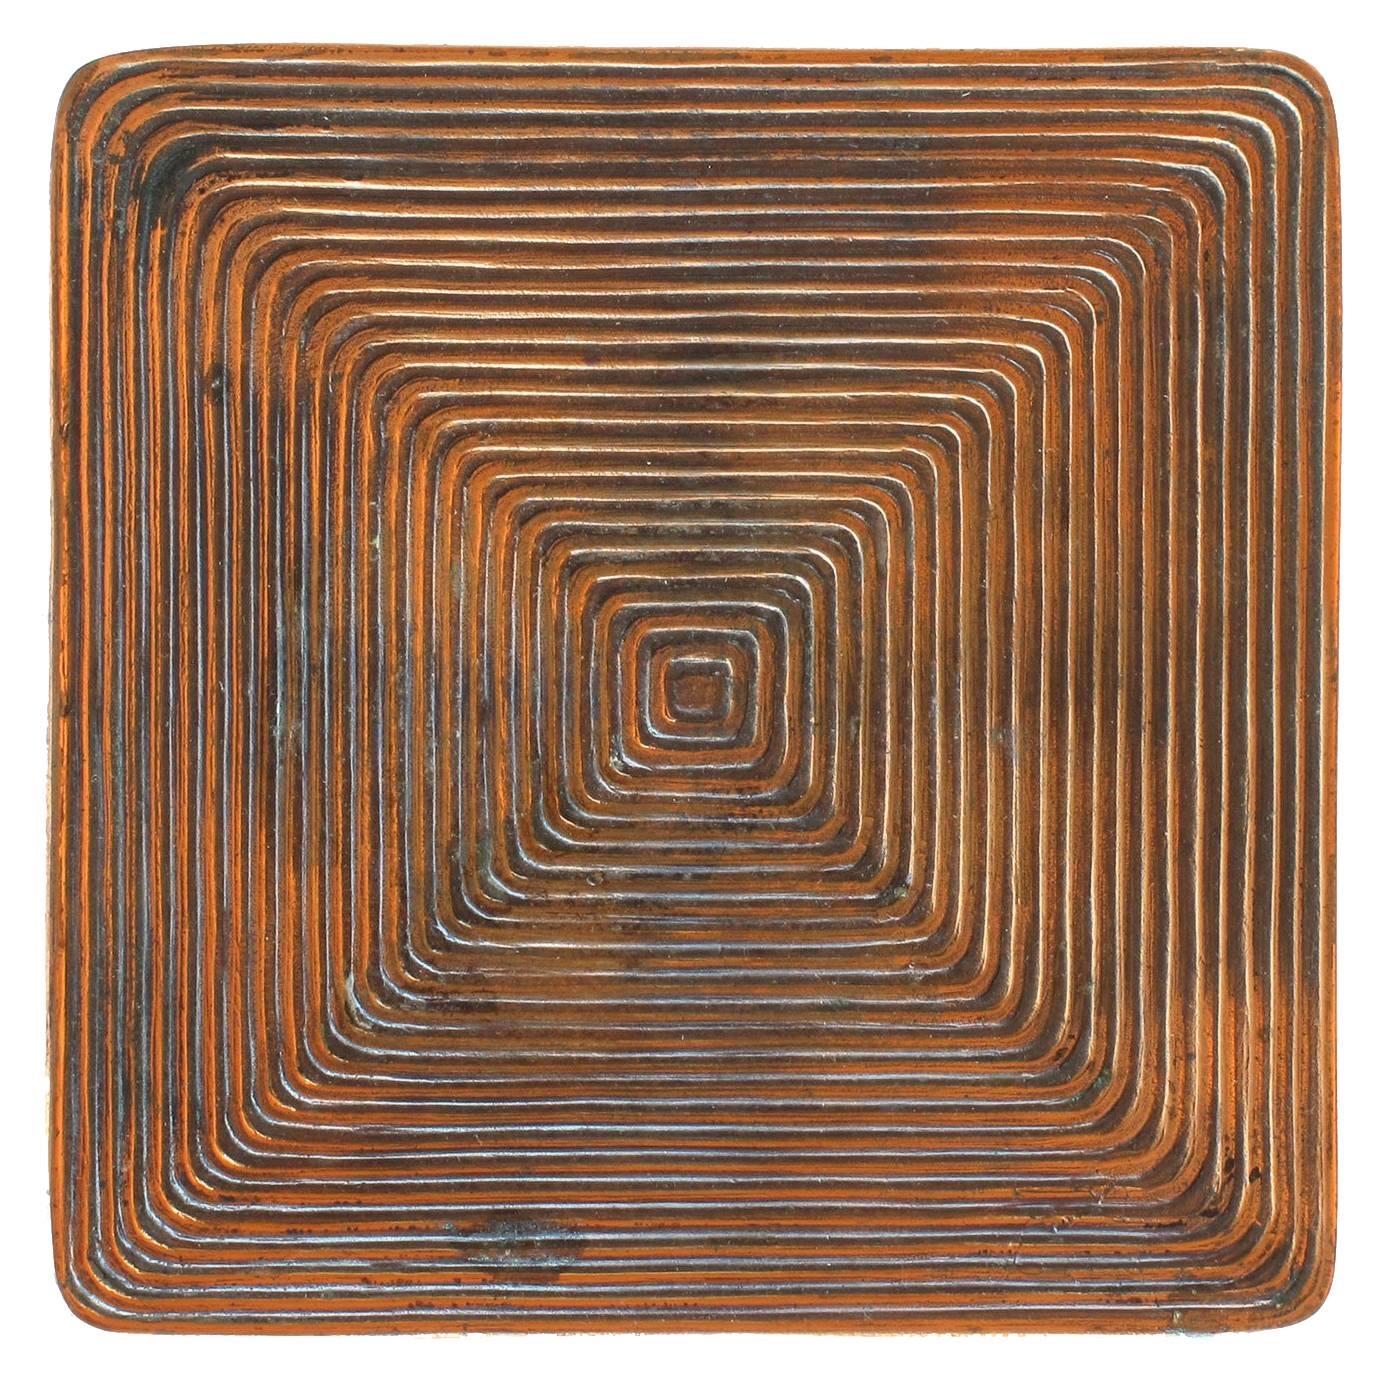 Ben Seibel Square Shaped Copper Tray with Concentric Squares Design Jenfred Ware For Sale